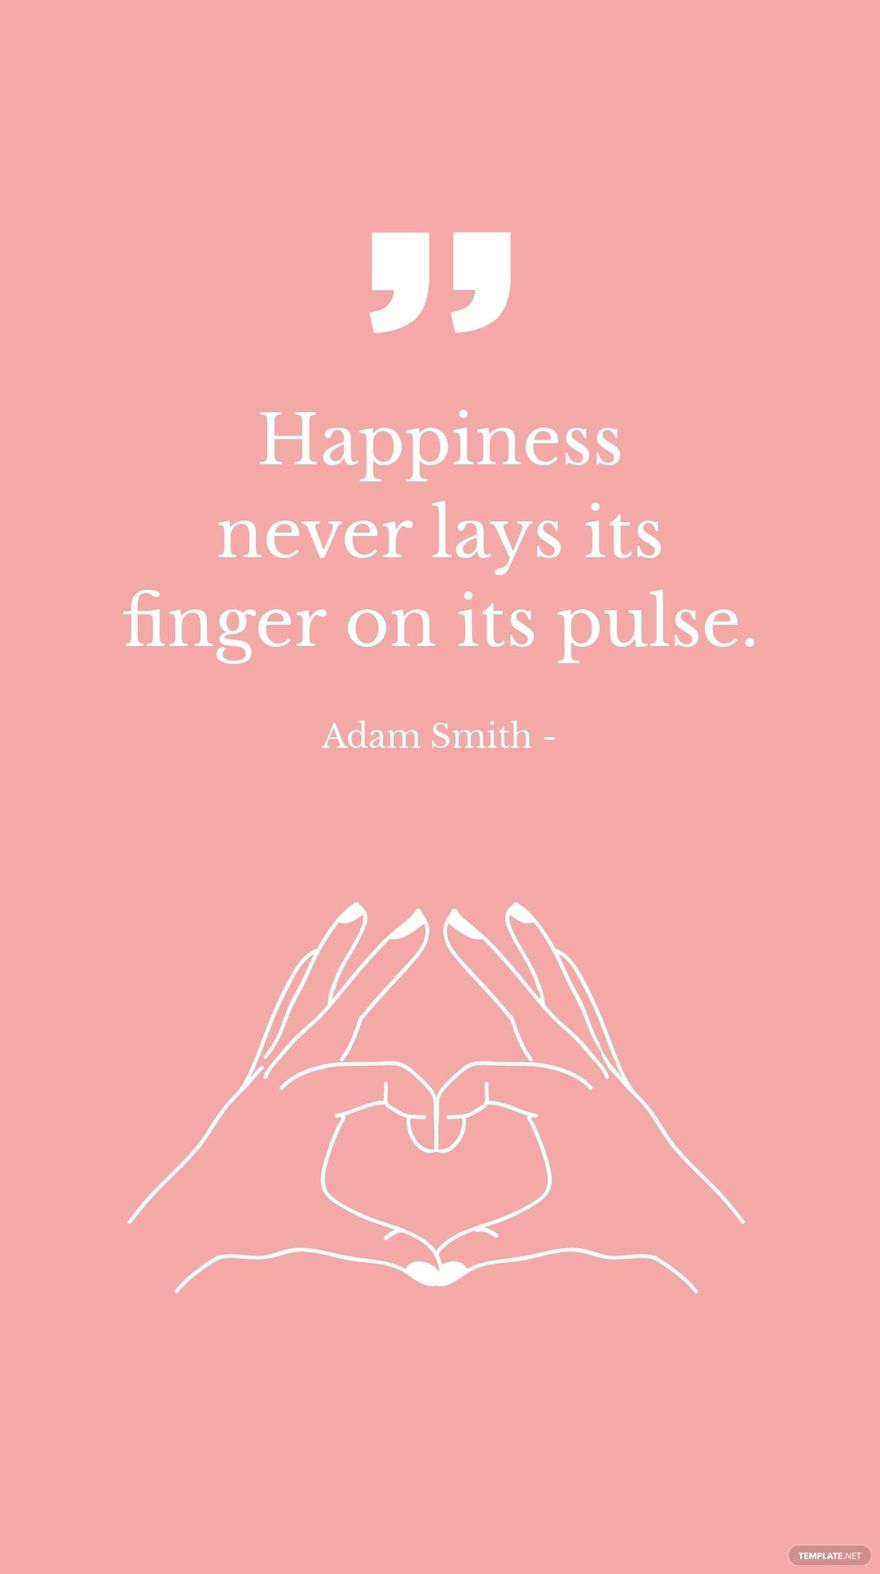 Adam Smith - Happiness never lays its finger on its pulse.